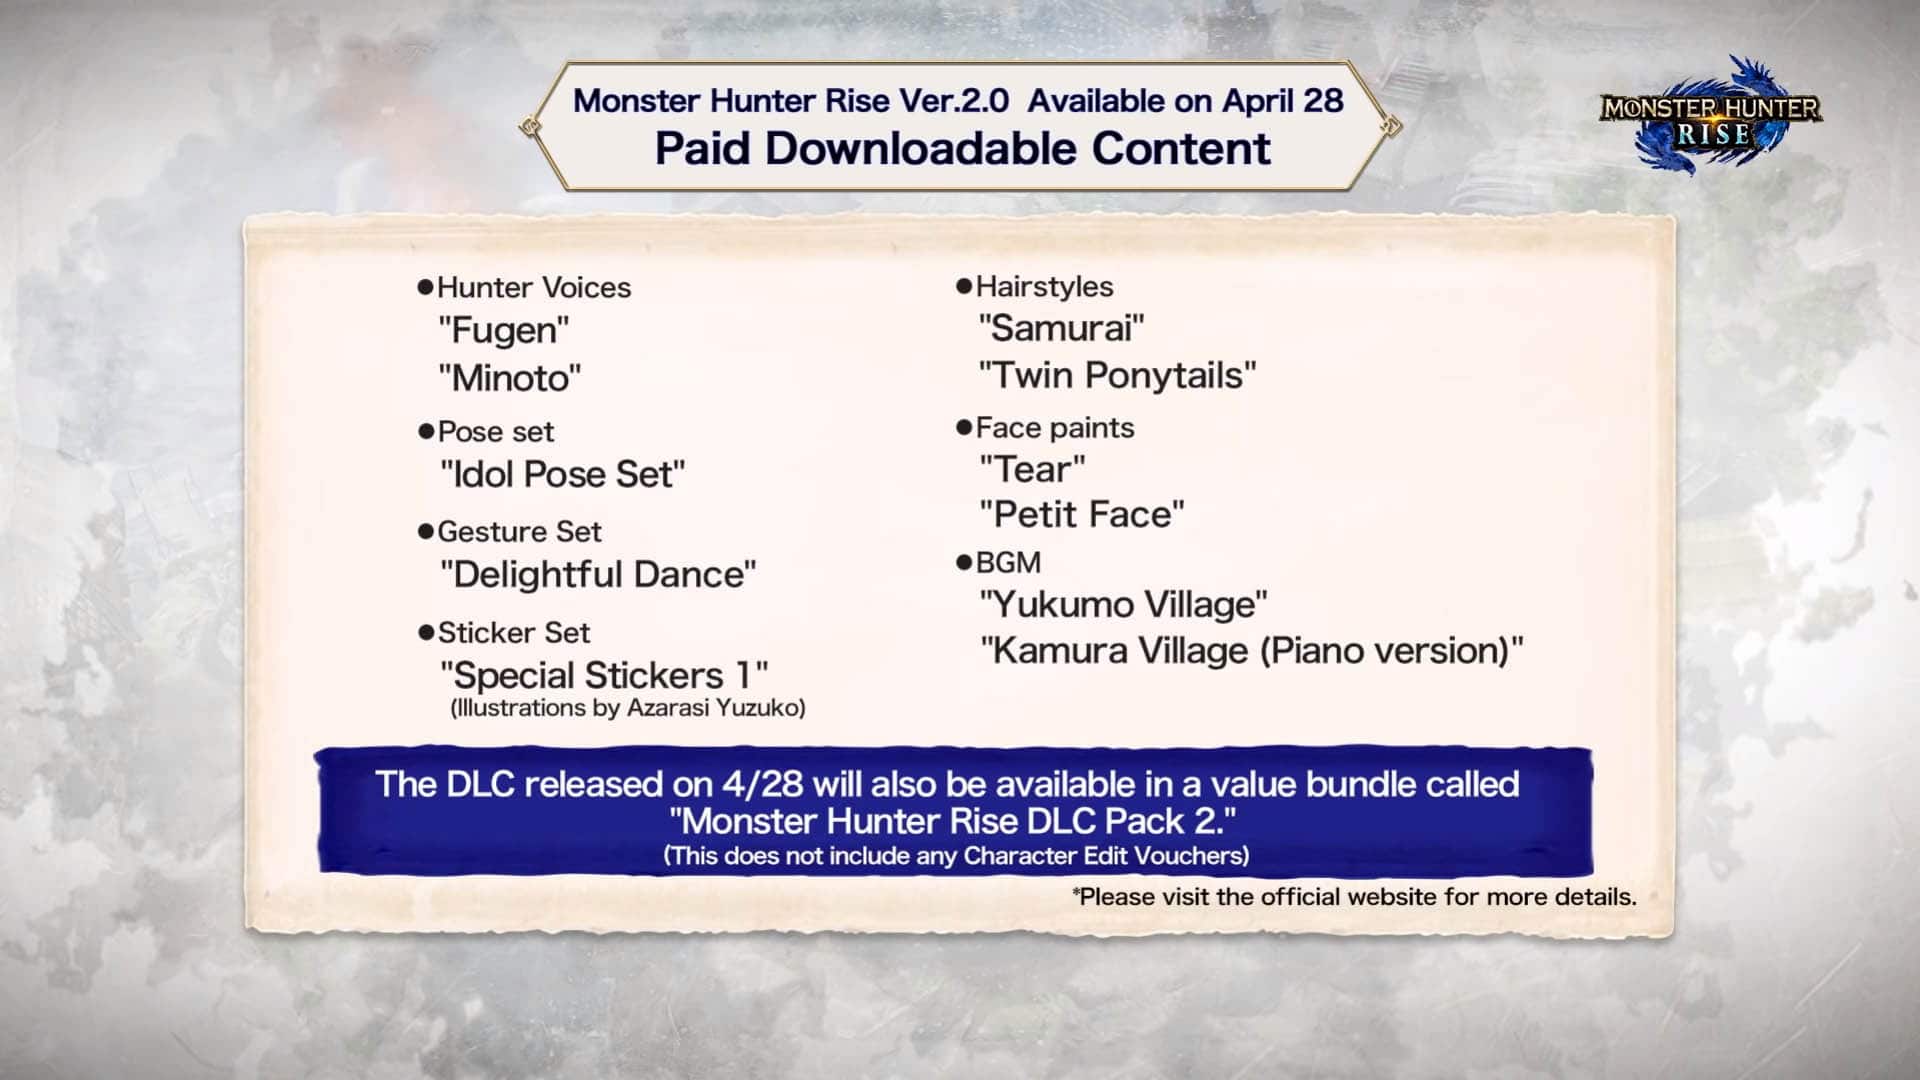 A list of new dlc being added to Monster Hunter Rise in black font against a tan background